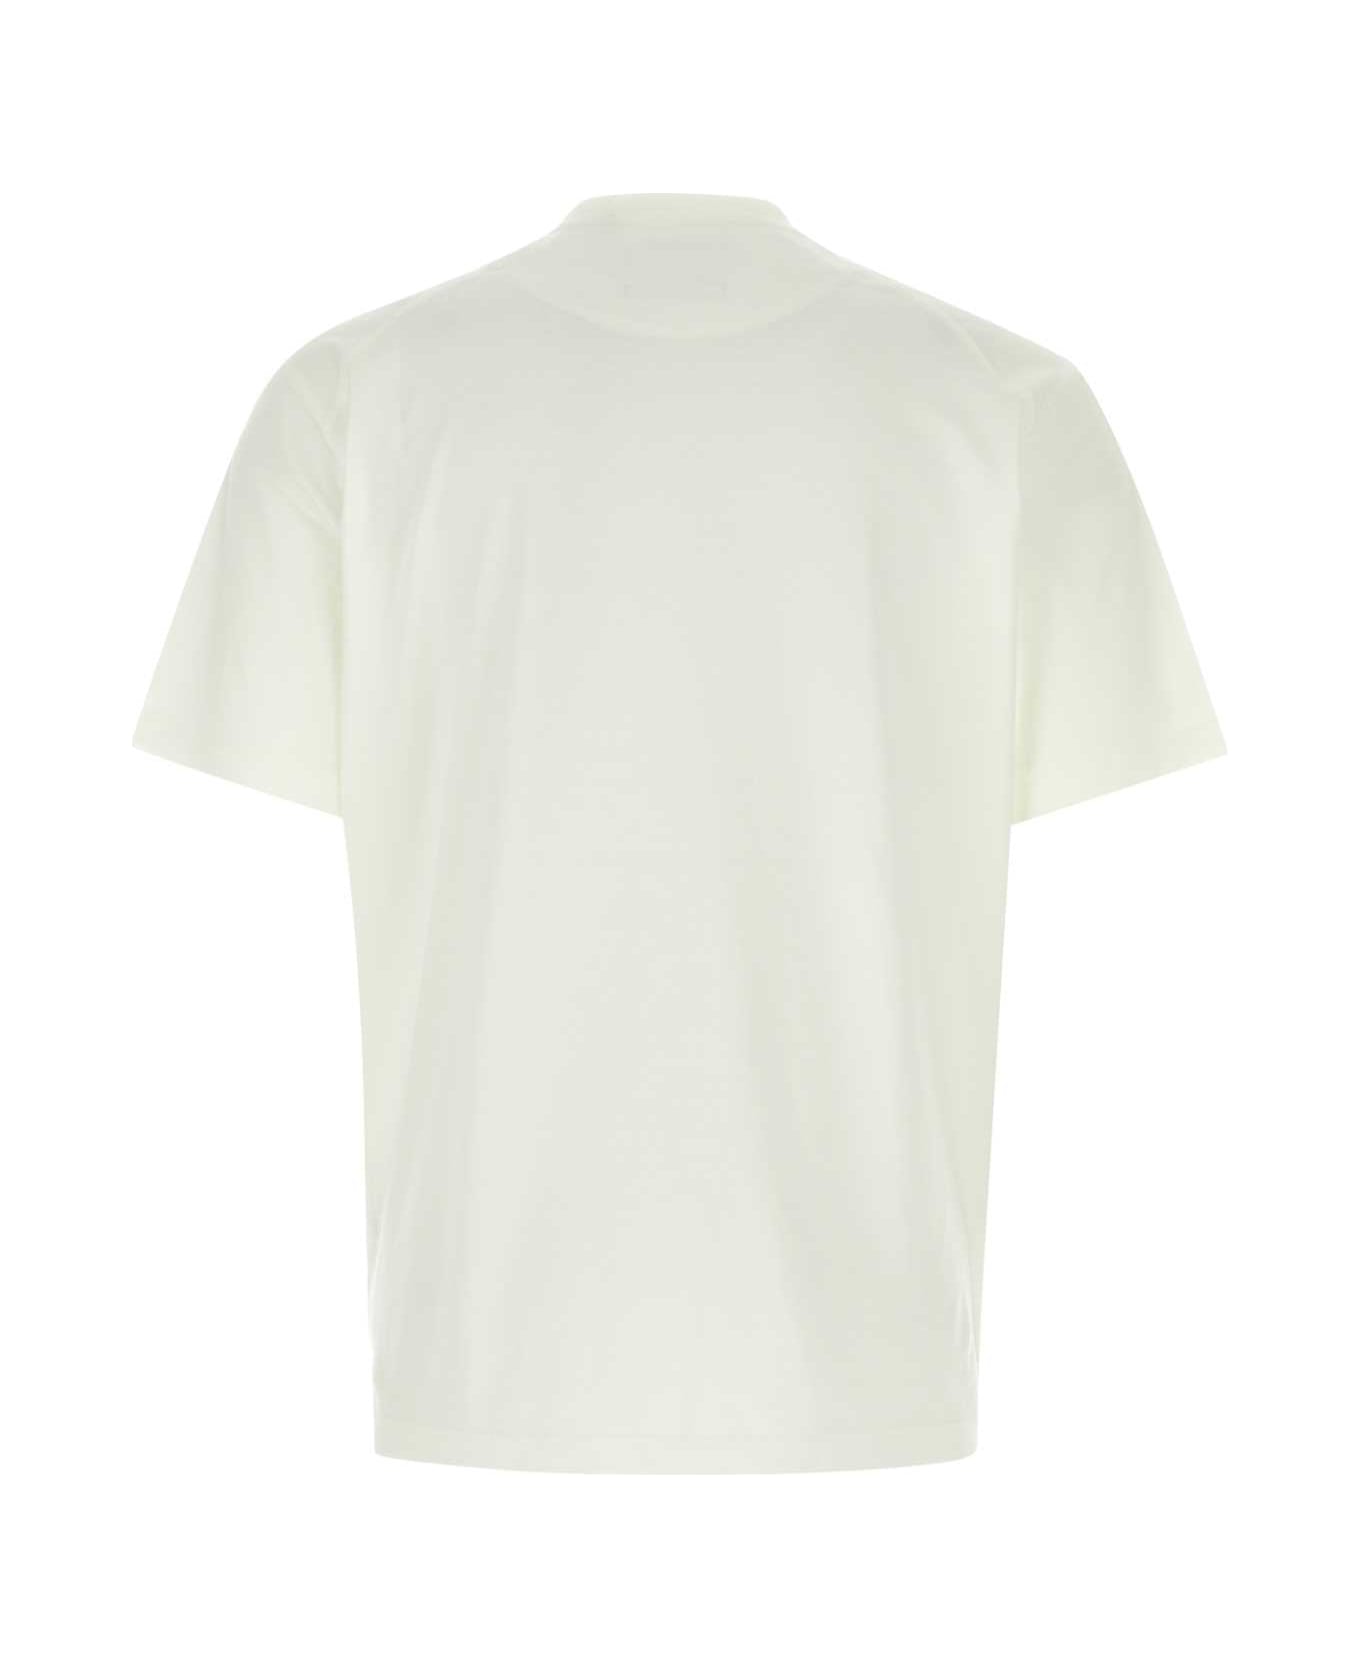 Y-3 Ivory Cotton T-shirt - OWHITE